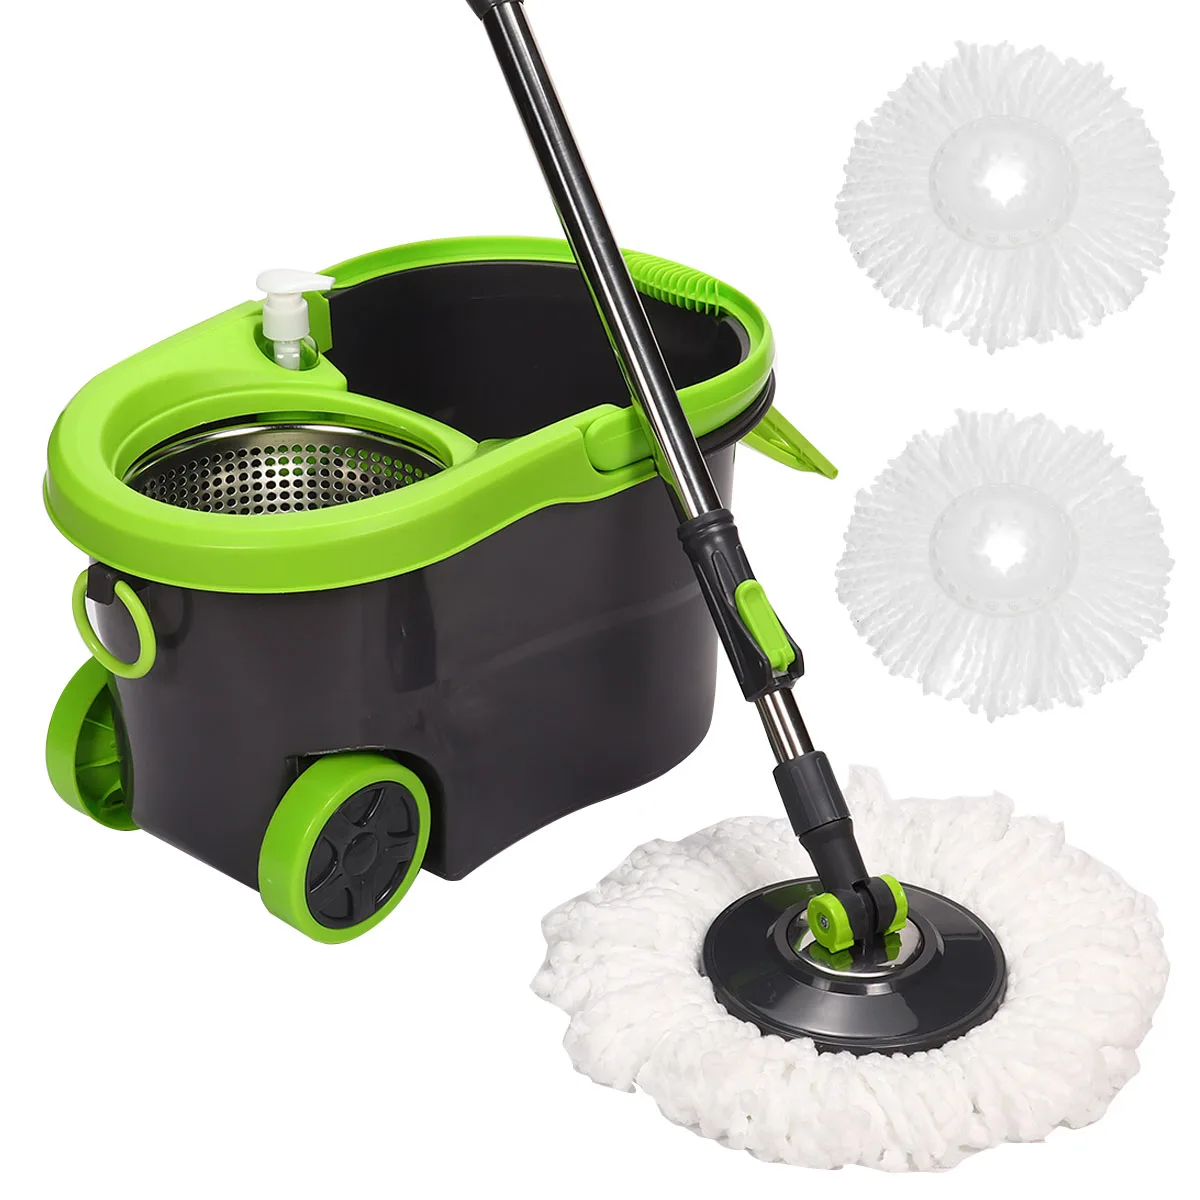 

Hands Free 360 Rotating Spin Floor Mop Bucket Set with 2 Microfiber Head Wringing Wet Dry Use on Wood Tiles Home Cleaning Tools